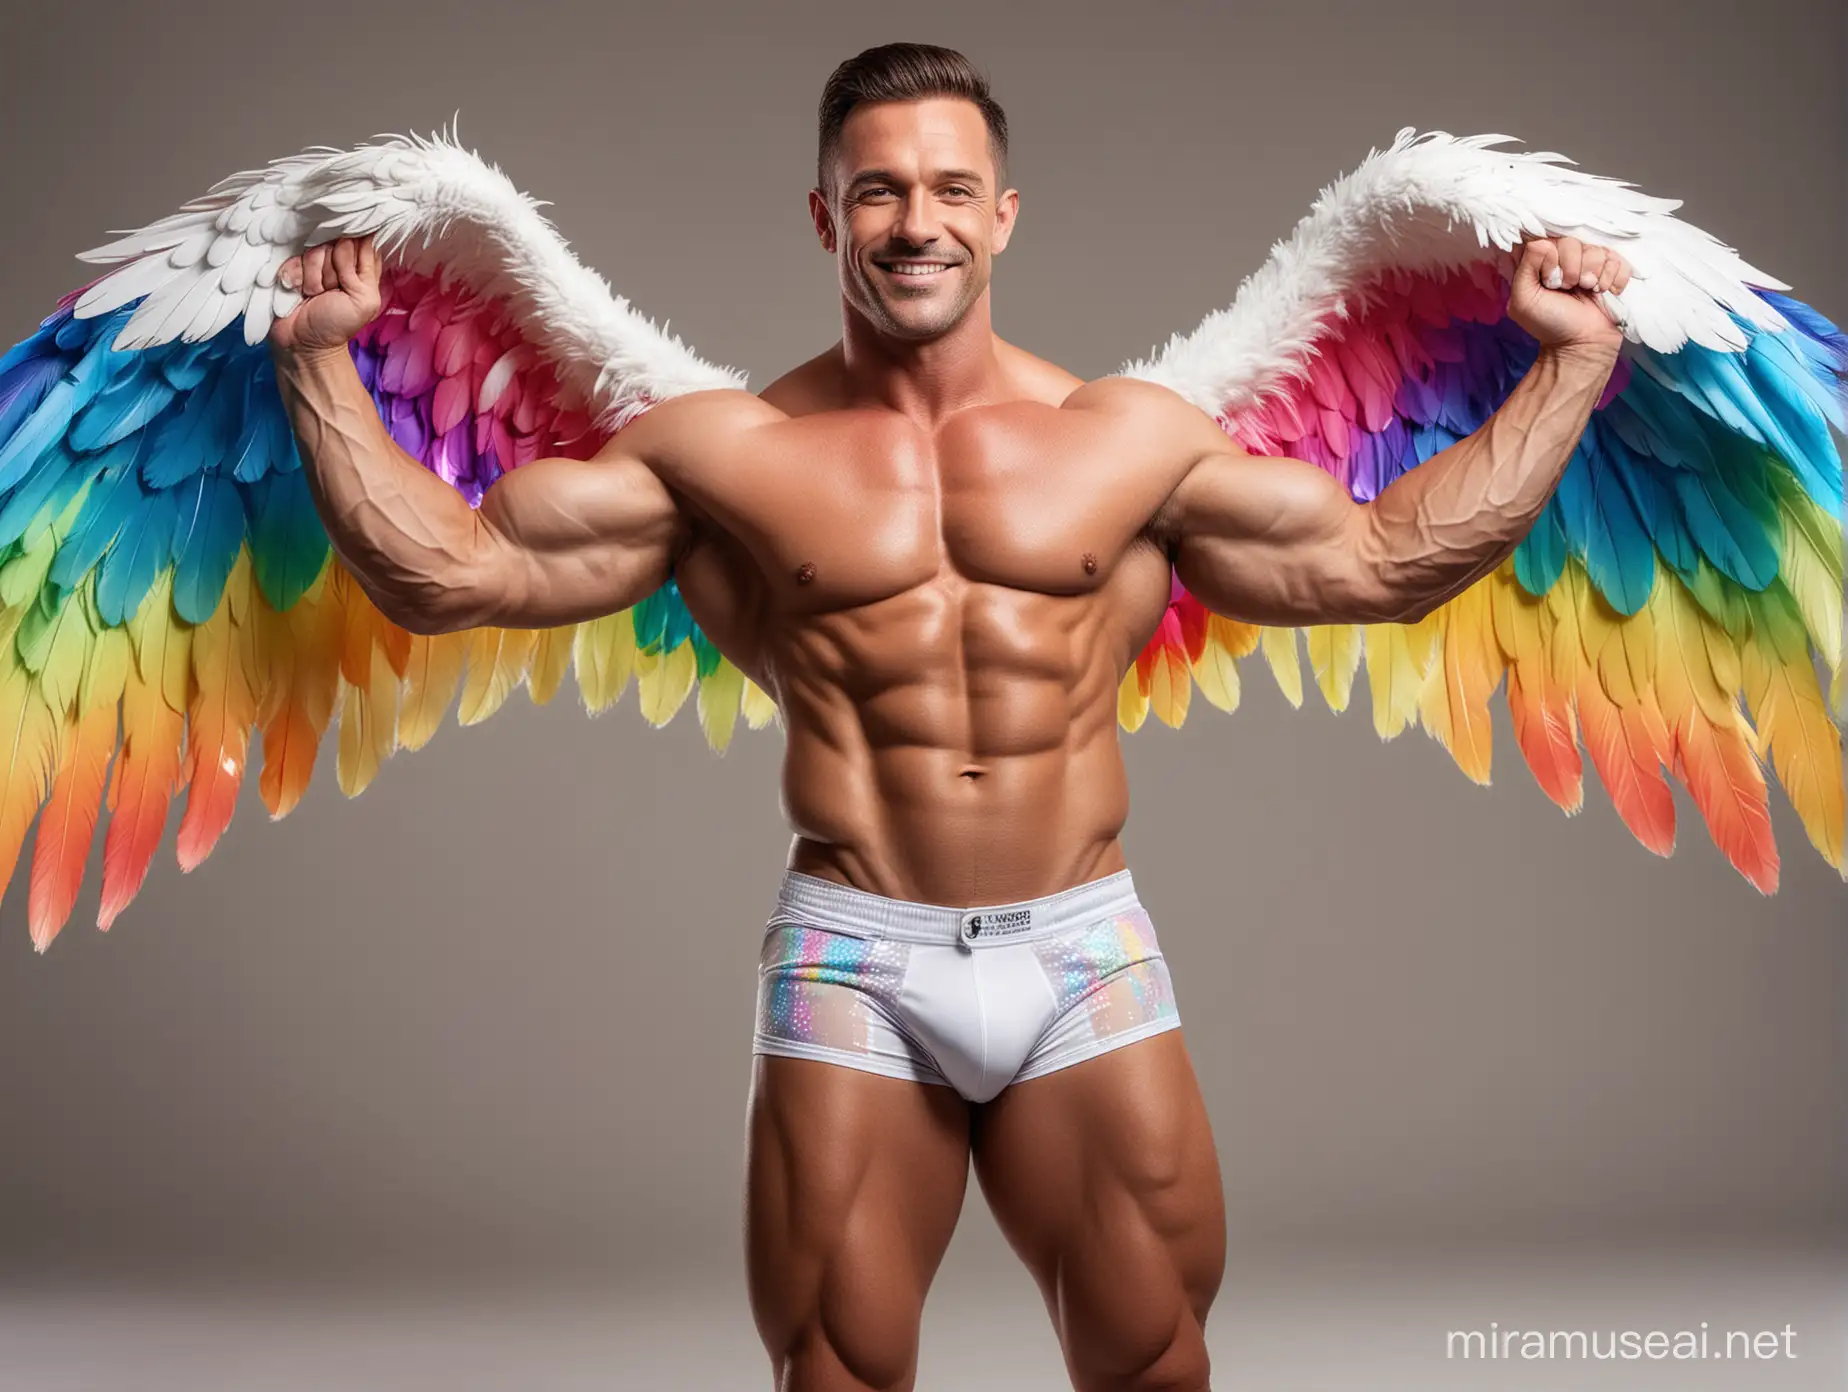 Studio Light Full Body to feet Topless 30s Ultra Chunky IFBB Bodybuilder Daddy with Great Smile wearing Multi-Highlighter Bright Rainbow with white Coloured See Through Eagle Wings Shoulder LED Jacket Short shorts left arm up Flexing Bicep Pose